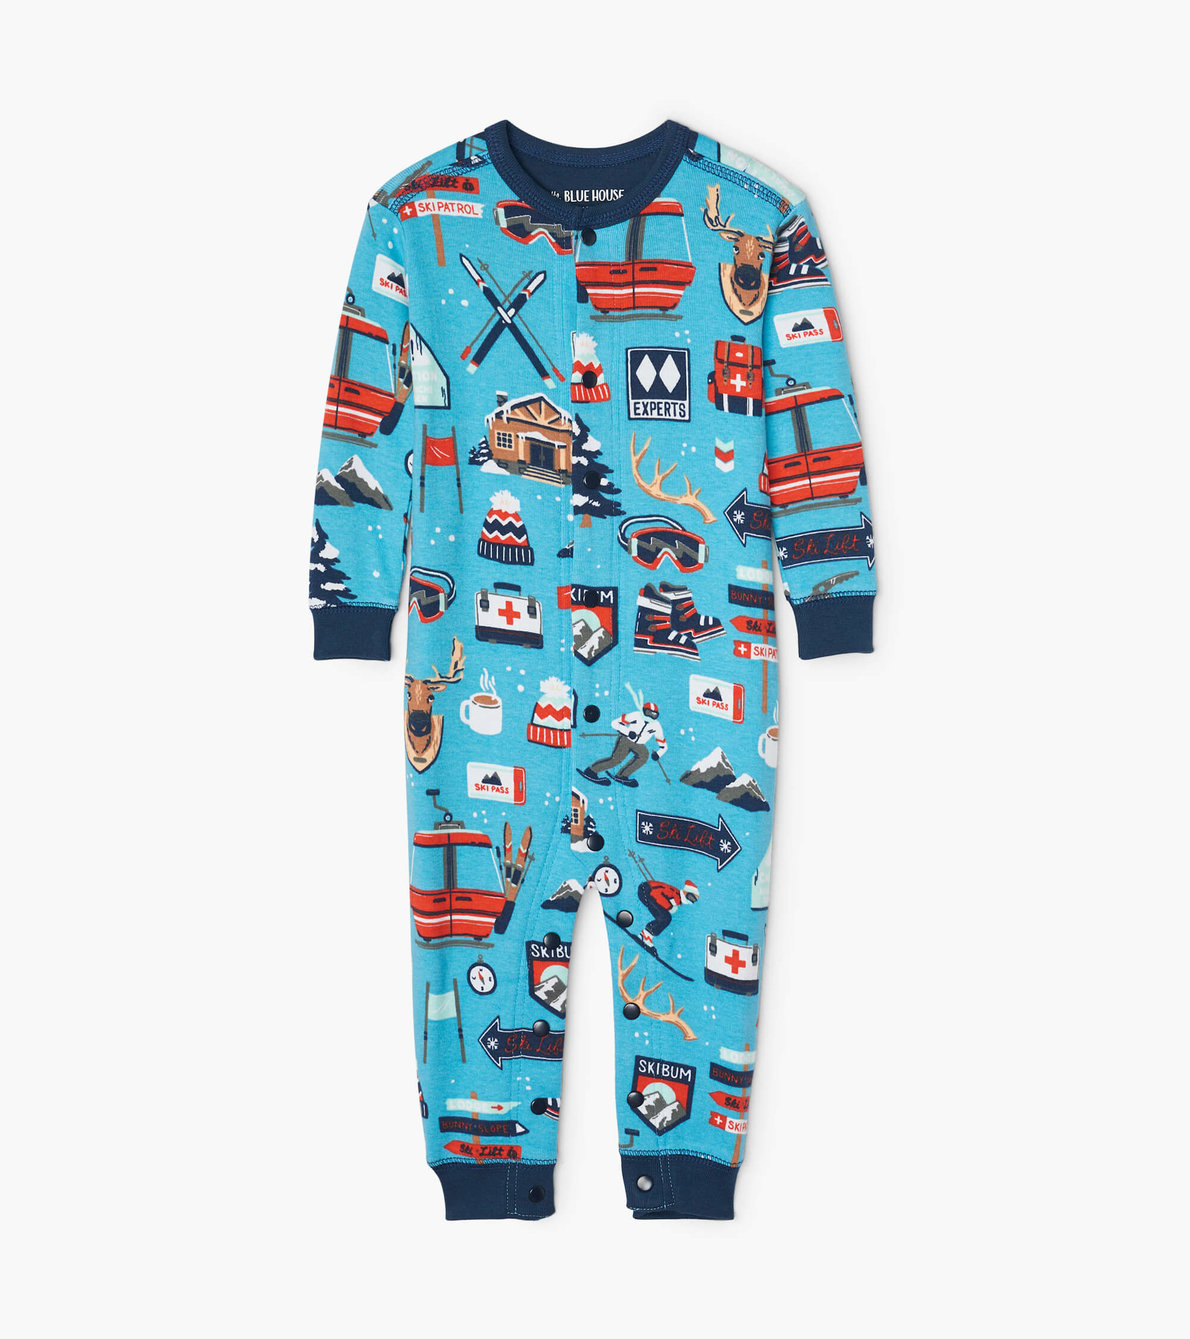 View larger image of Ski Holiday Baby Union Suit